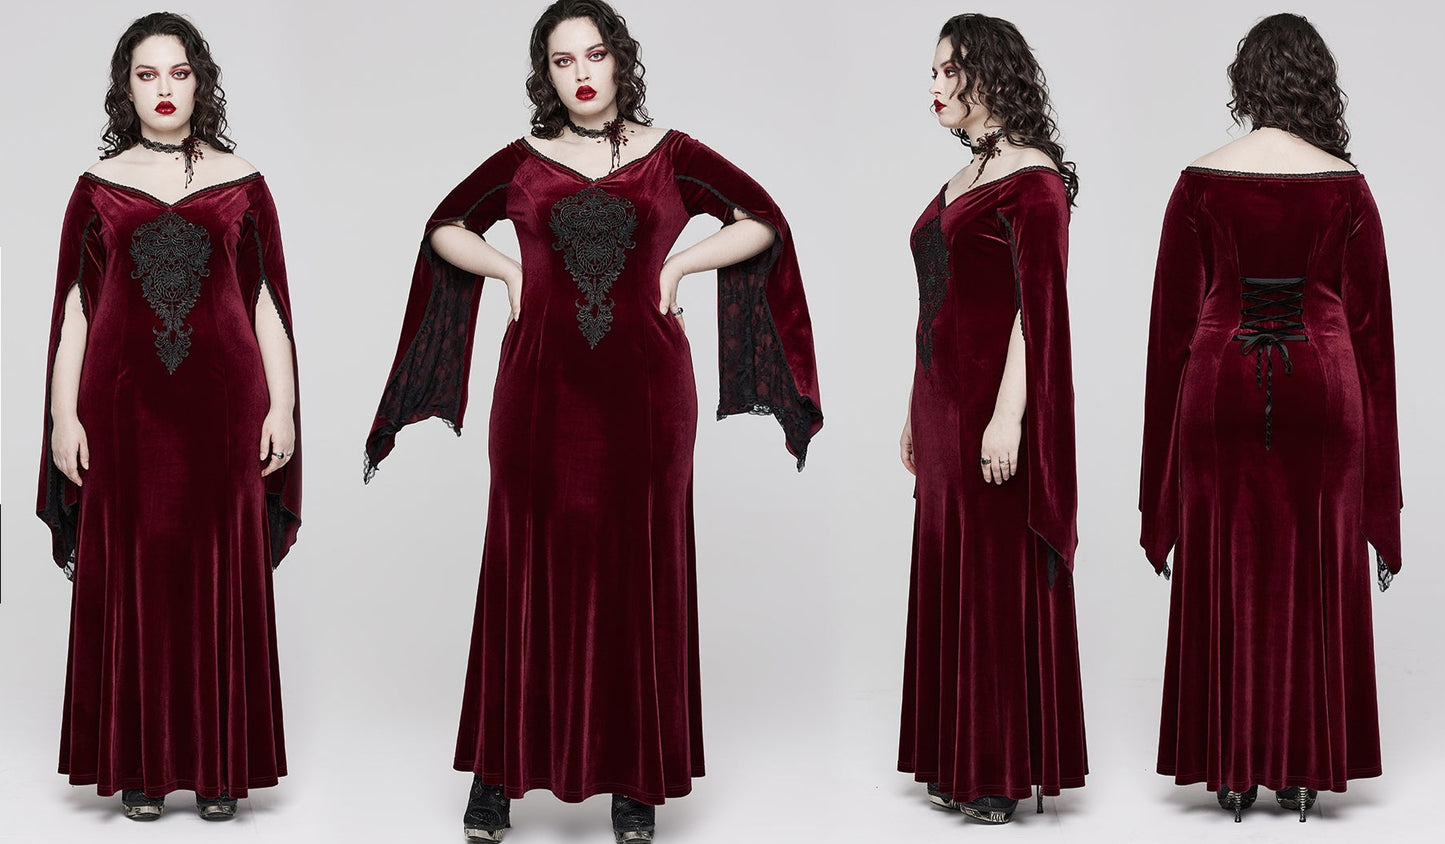 Enchantress' Embrace: Adjustable V-Neck Goth Dress with Exquisite Decal and Dramatic Sleeves